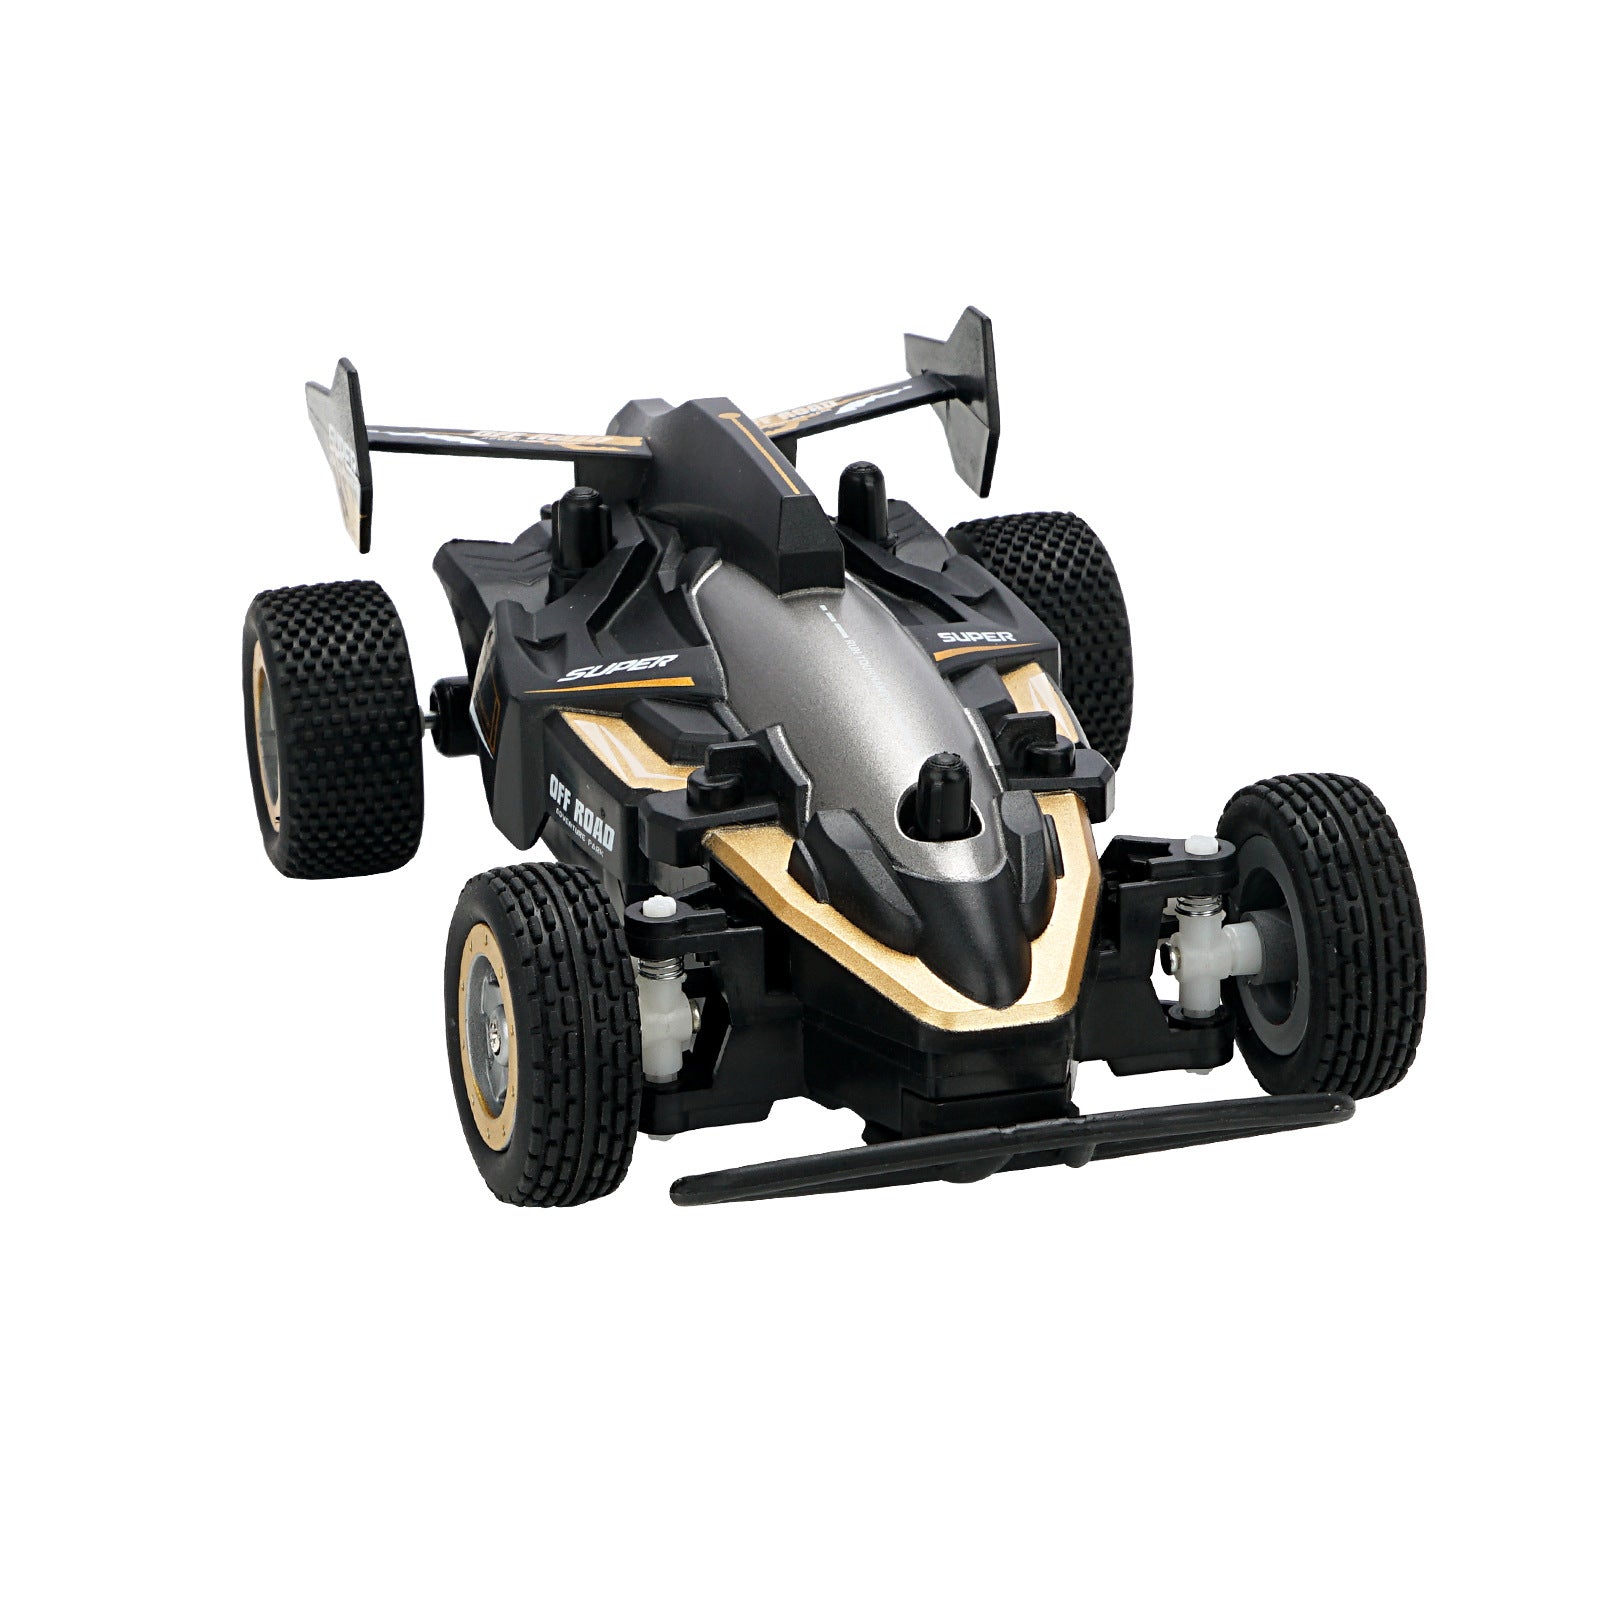 Hosim RC Momster Car Truck 1/20 Scale 2.4GHz RTR Truggy Truck Remote Control Cars 4WD Off-Road Black